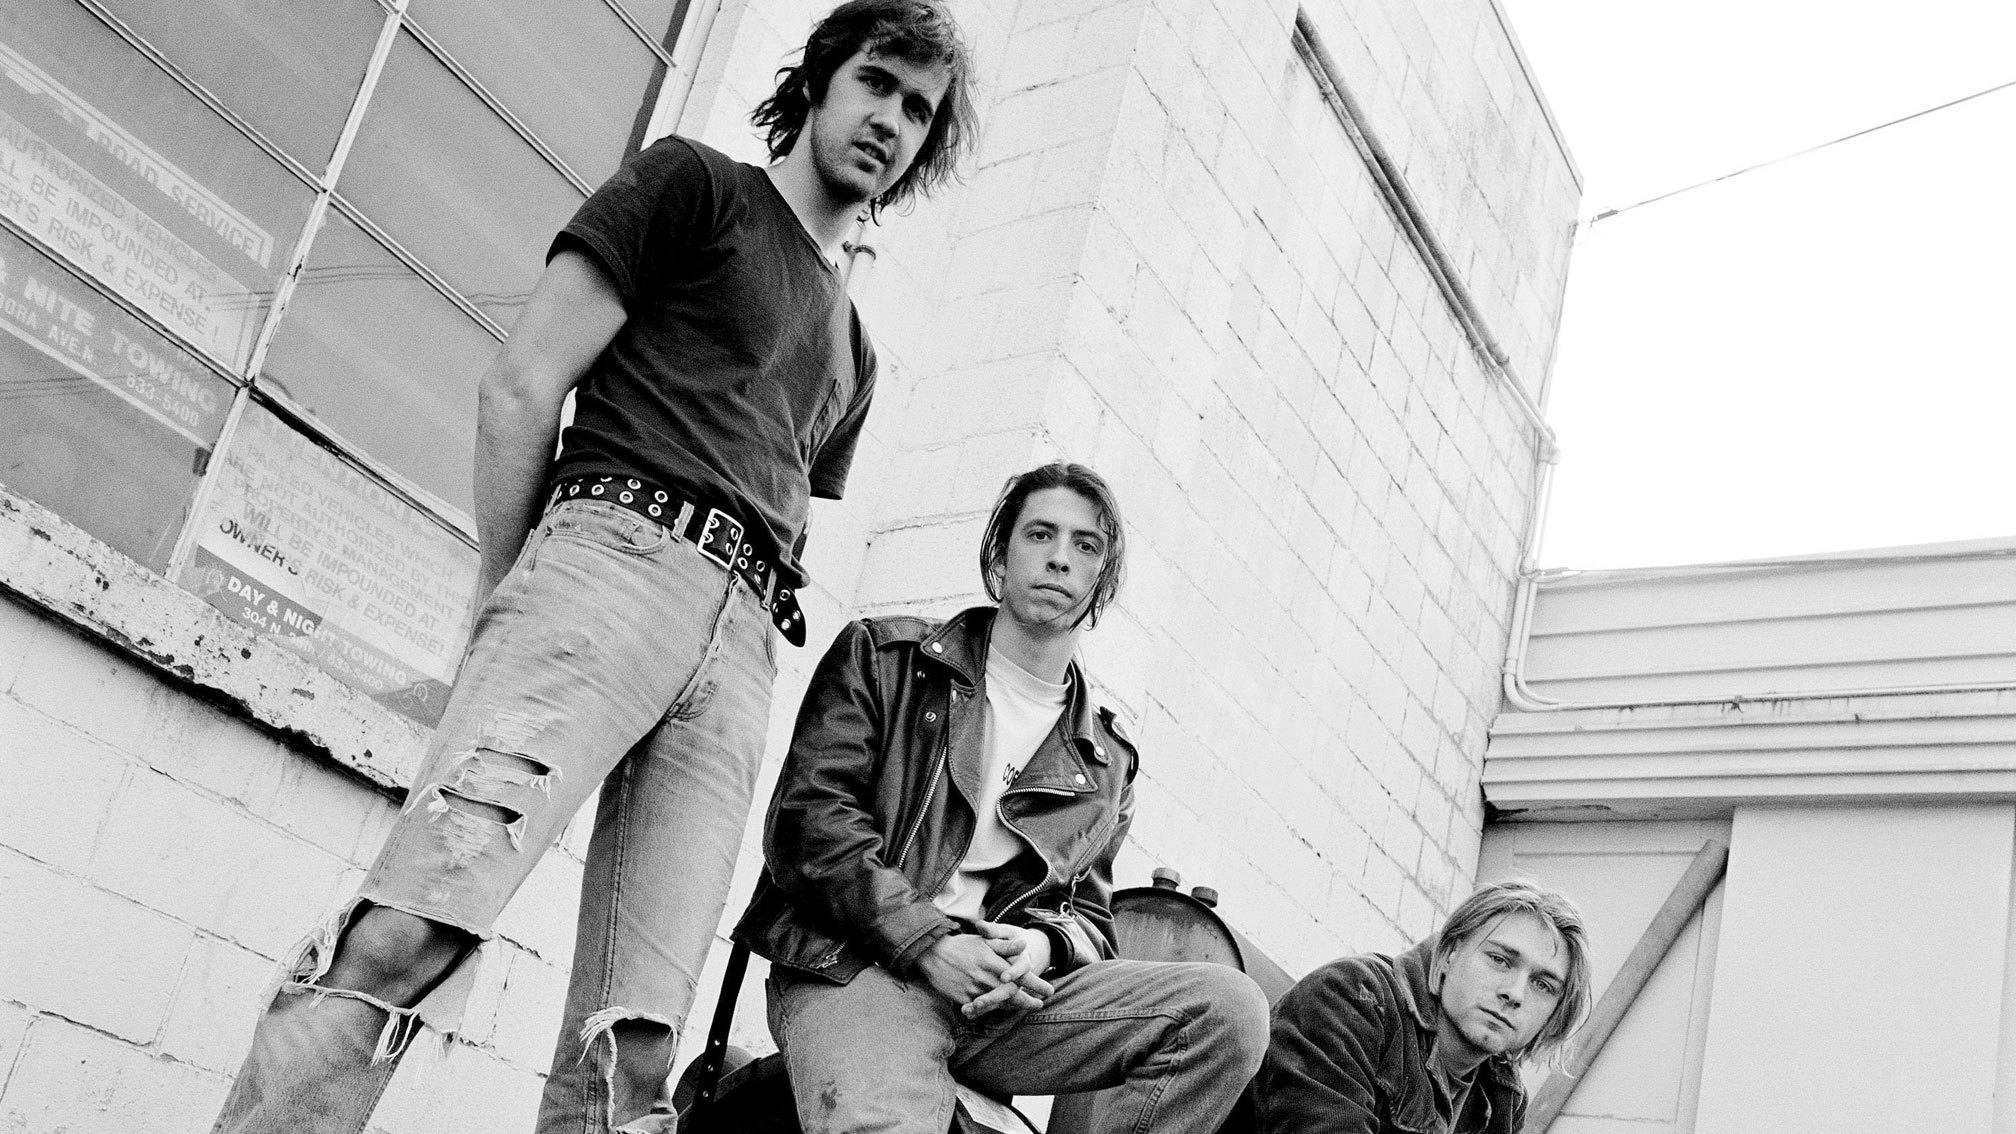 The 20 greatest Nirvana songs – ranked